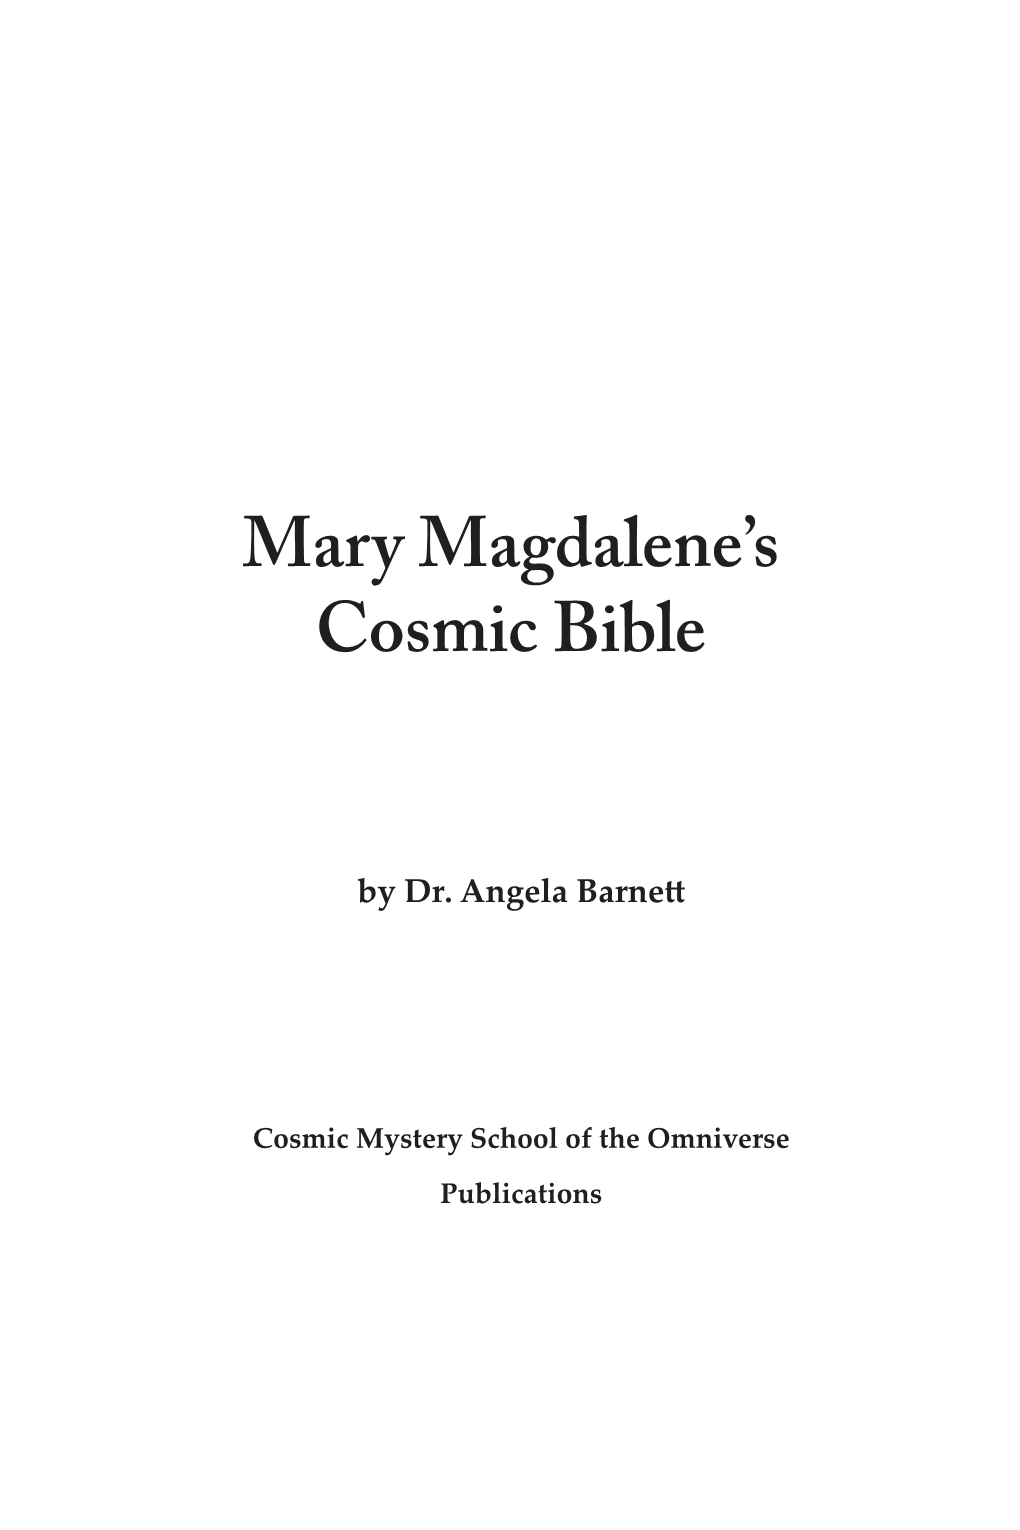 Mary Magdalene's Cosmic Bible